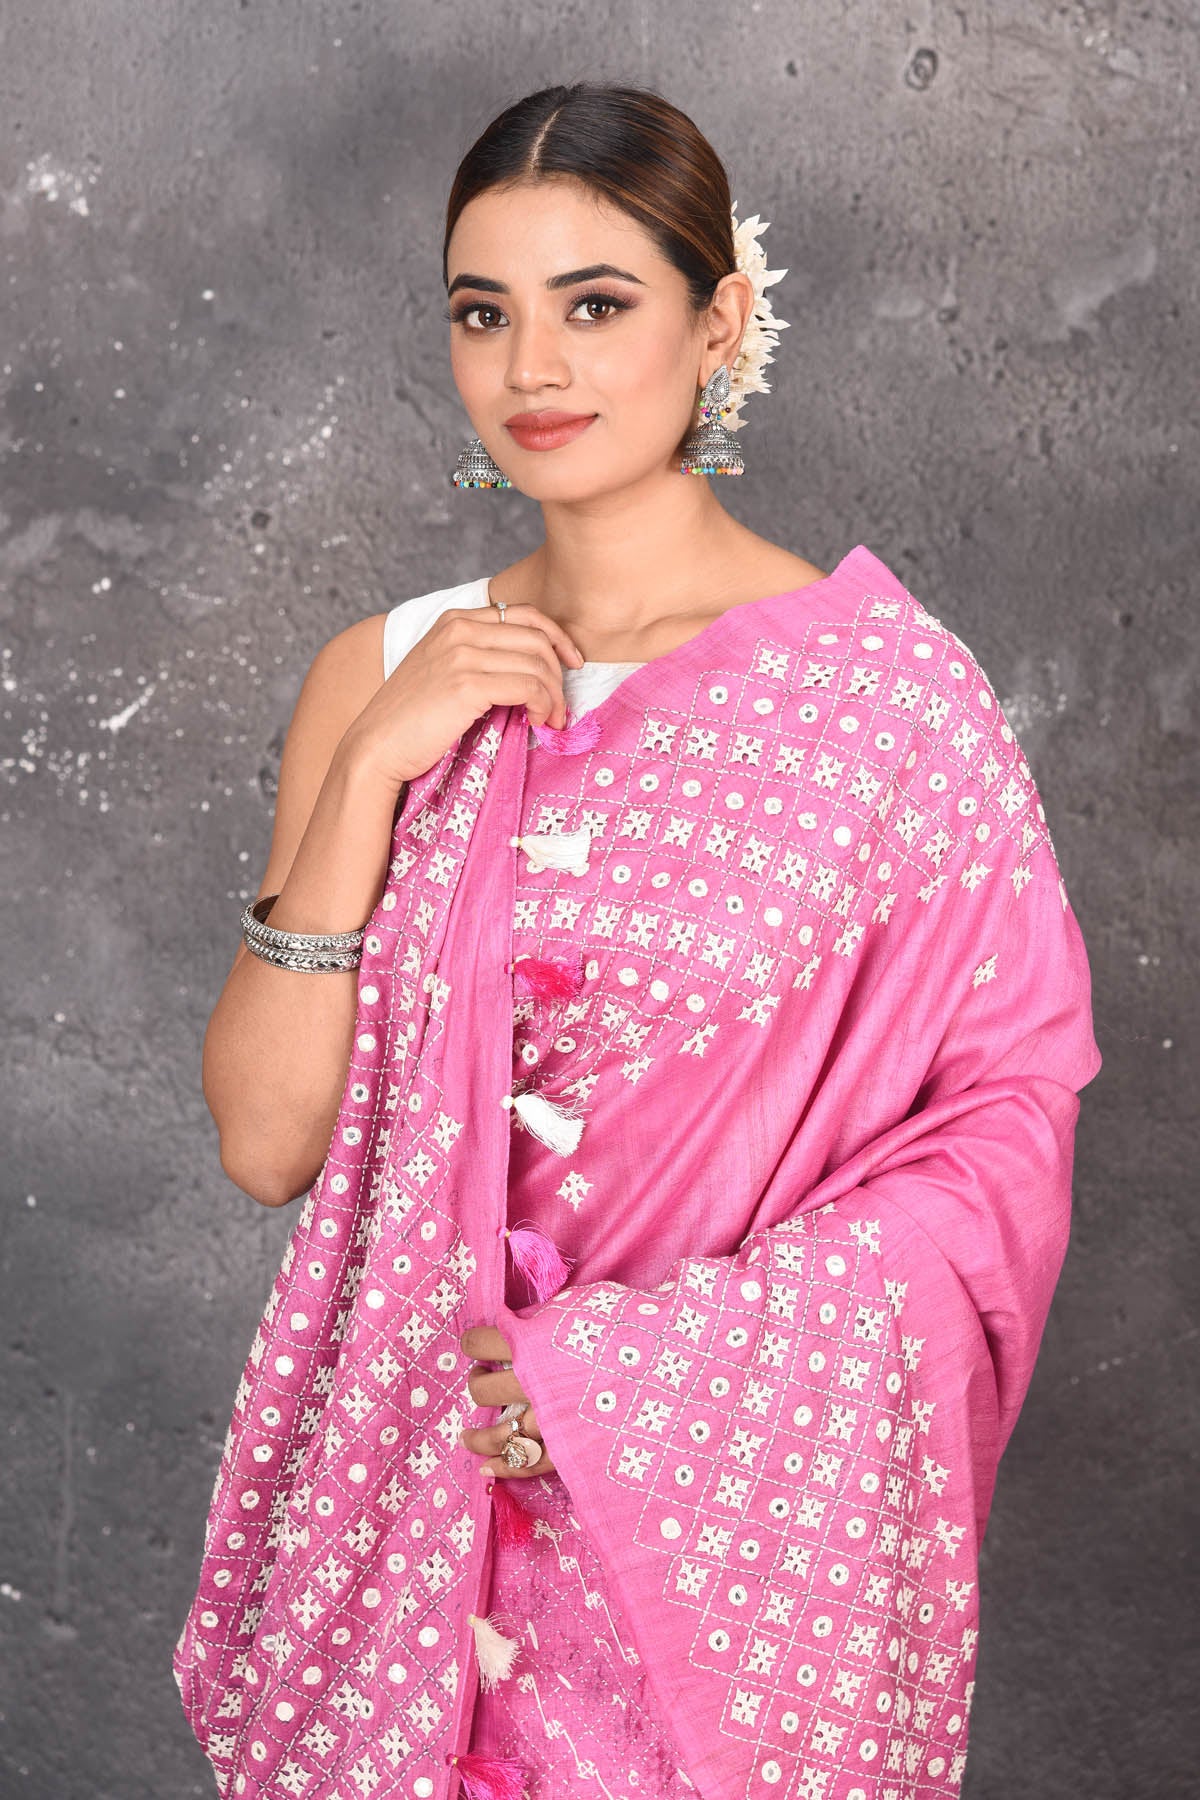 Shop elegant red zari woven pure tussar gicha silk saree in pink color with beautiful mirrorwork online in USA which has crafted by skilled weaver of Banaras with elegance and grace, this saree is definitely the epitome of beauty and a must have in your collection. Buy designer handwoven sarees from Pure Elegance which brings you our latest collection of Bhagalpuri handwoven tussar silk sarees.-Close up.